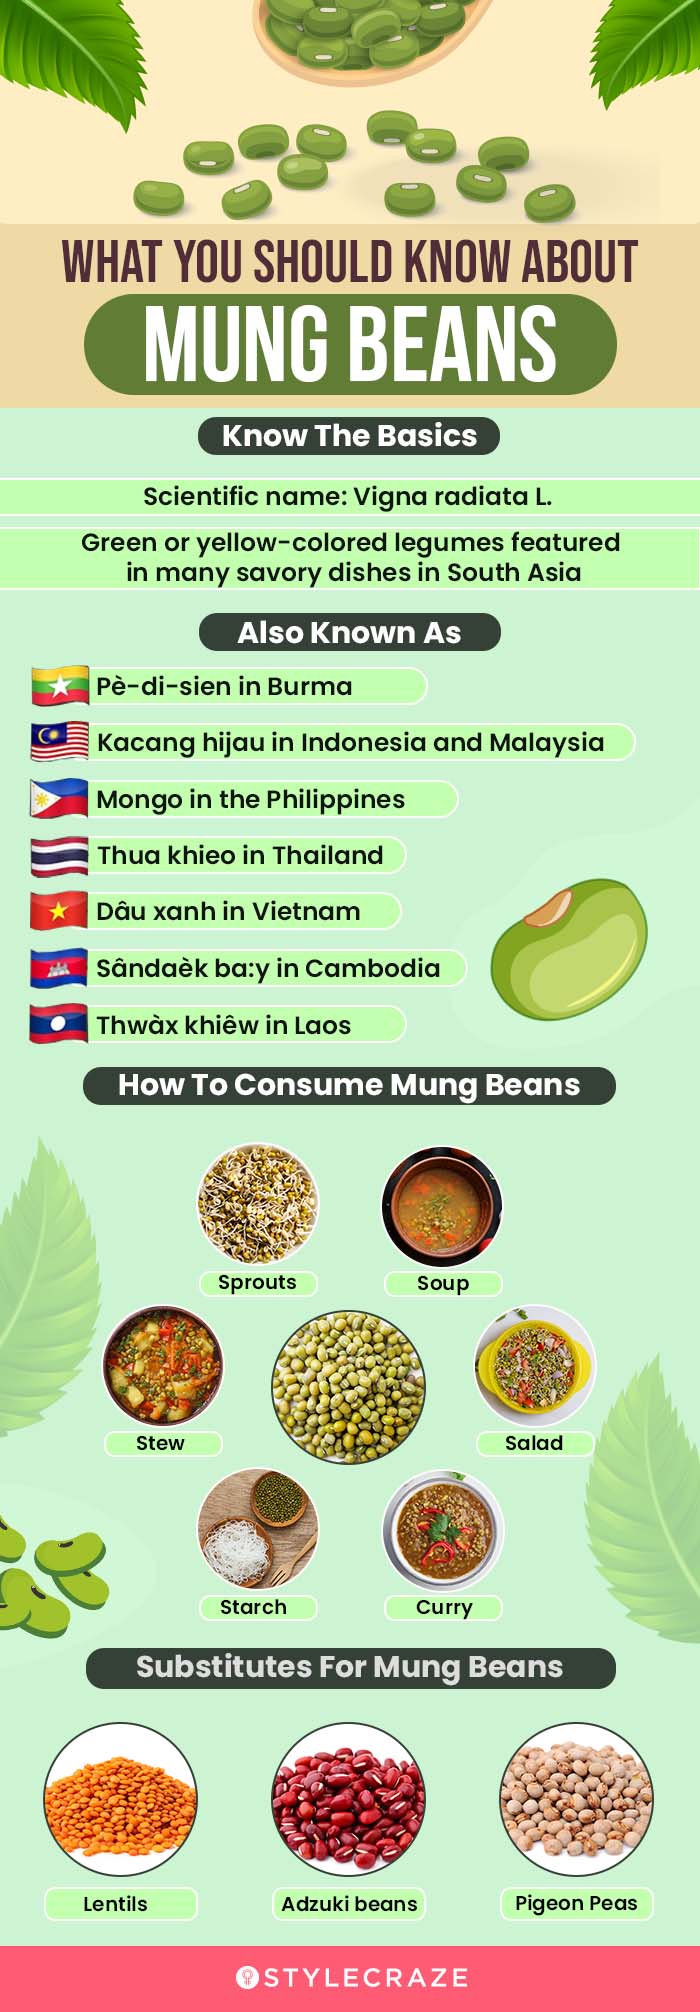 what you should know about mung beans [infographic]